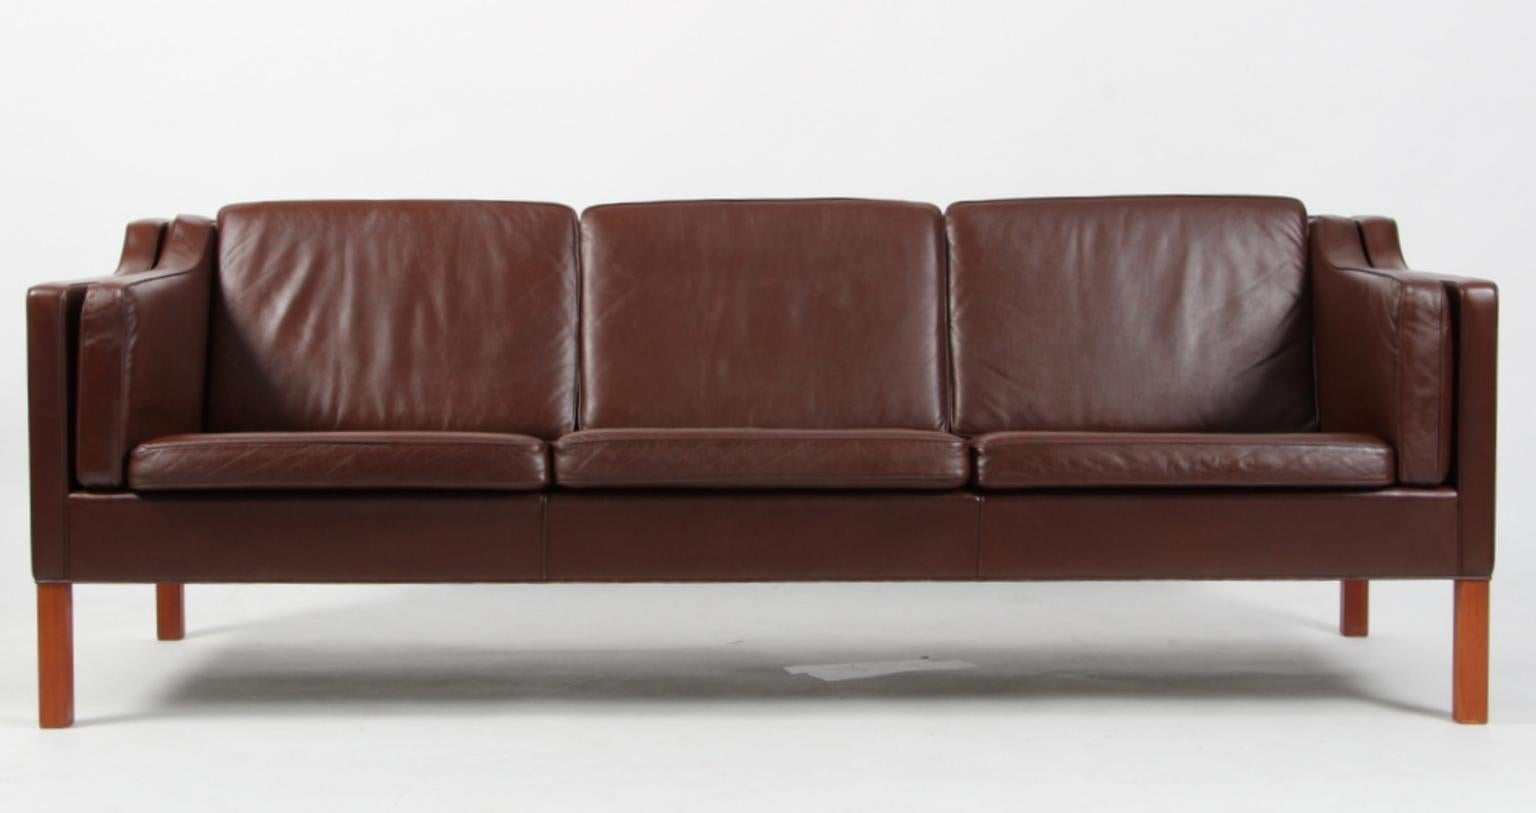 Børge Mogensen three-seat sofa with original brown leather upholstery.

Legs of mahogany.

Foam pillows.

Model 2213, made by Fredericia Furniture.